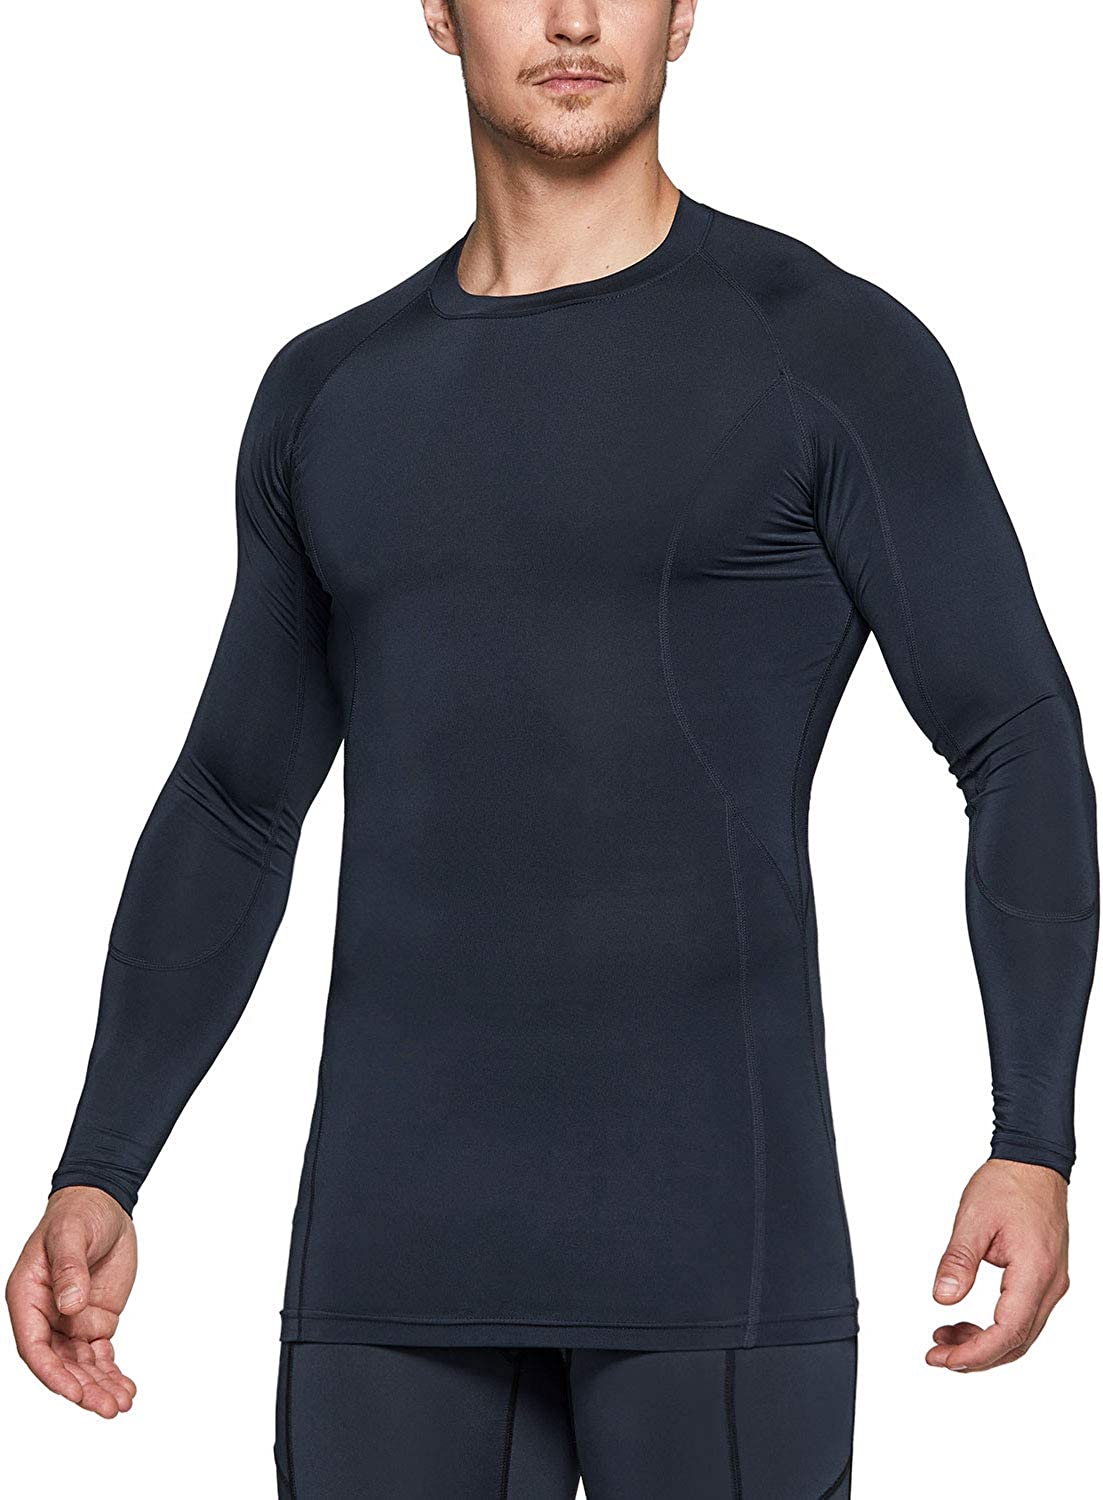 Cool Dry Athletic Workout Shirt TSLA Men's Tactical V-Neck Long Sleeve Compression Shirts Active Base Layer T-Shirts 